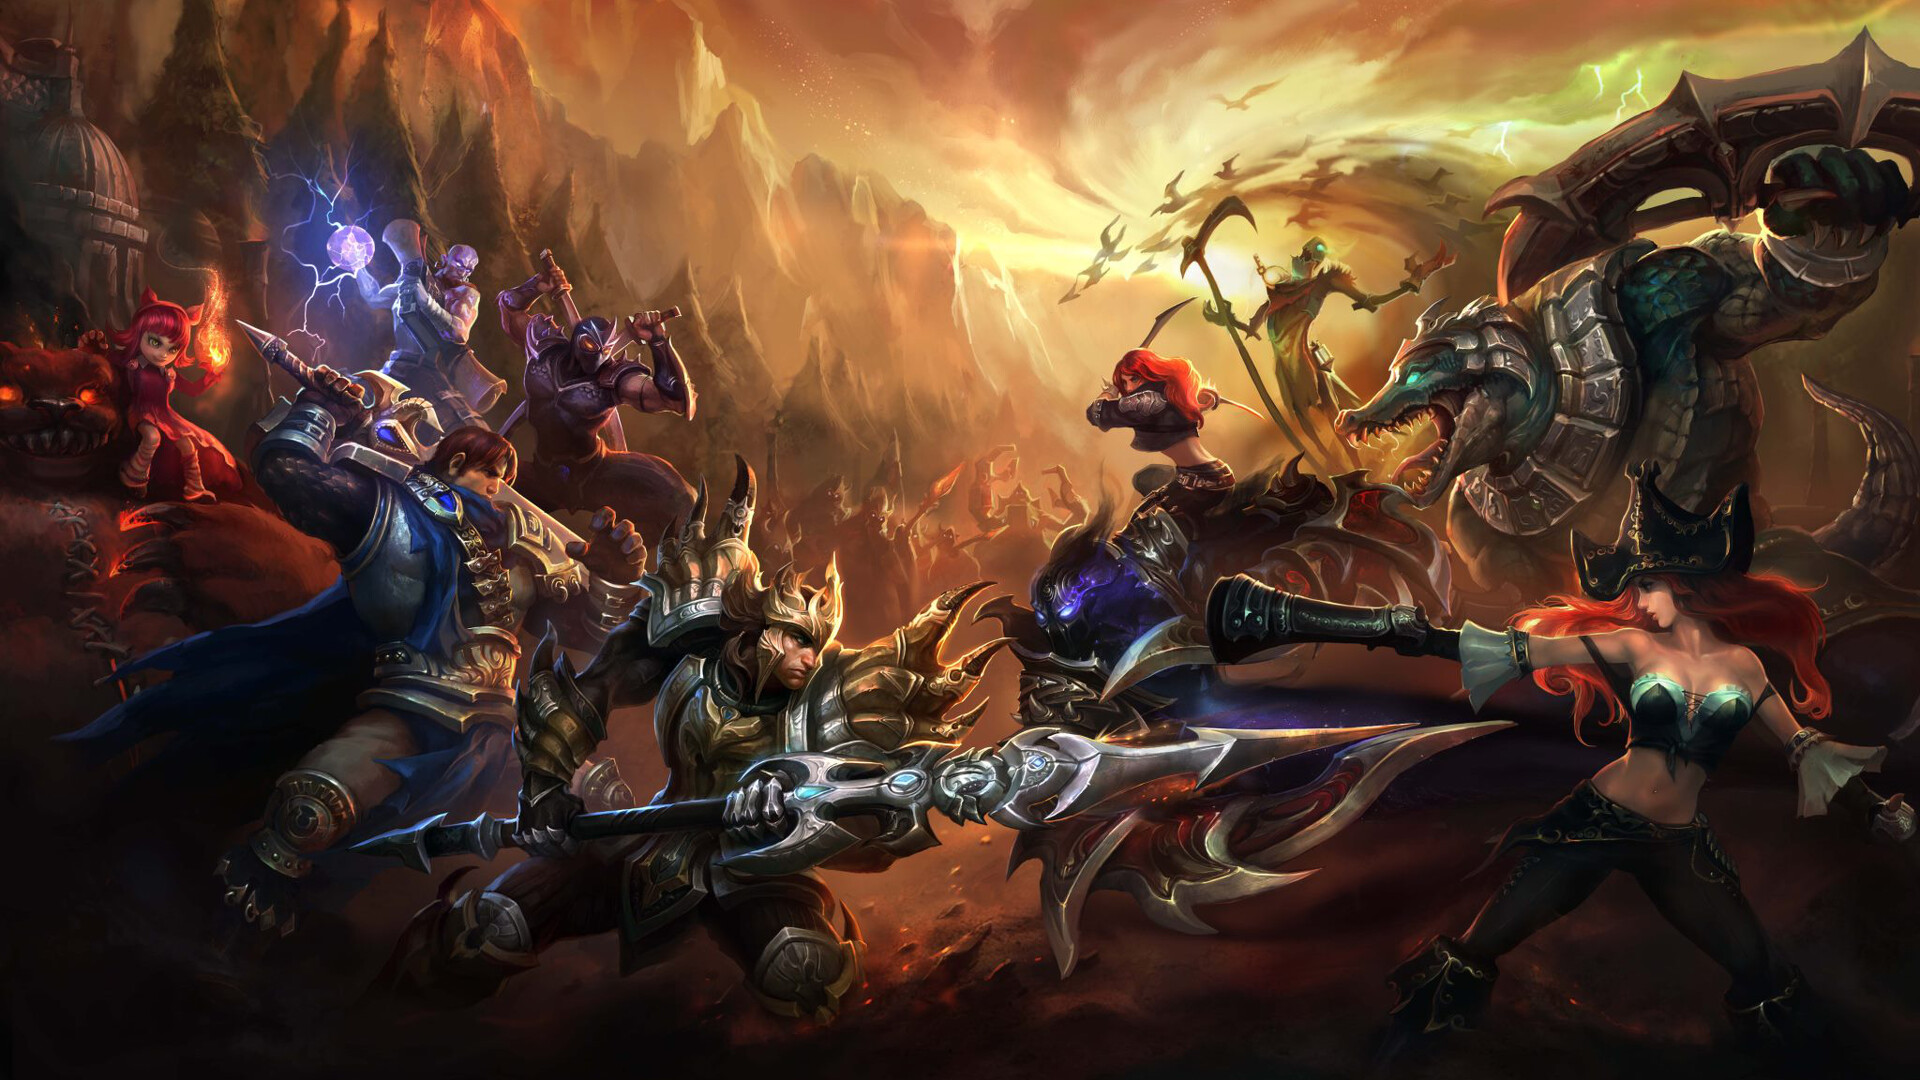 Garen: League of Legends playable characters, Champions in a battle, Popular MOBA, Competitive online video game. 1920x1080 Full HD Background.